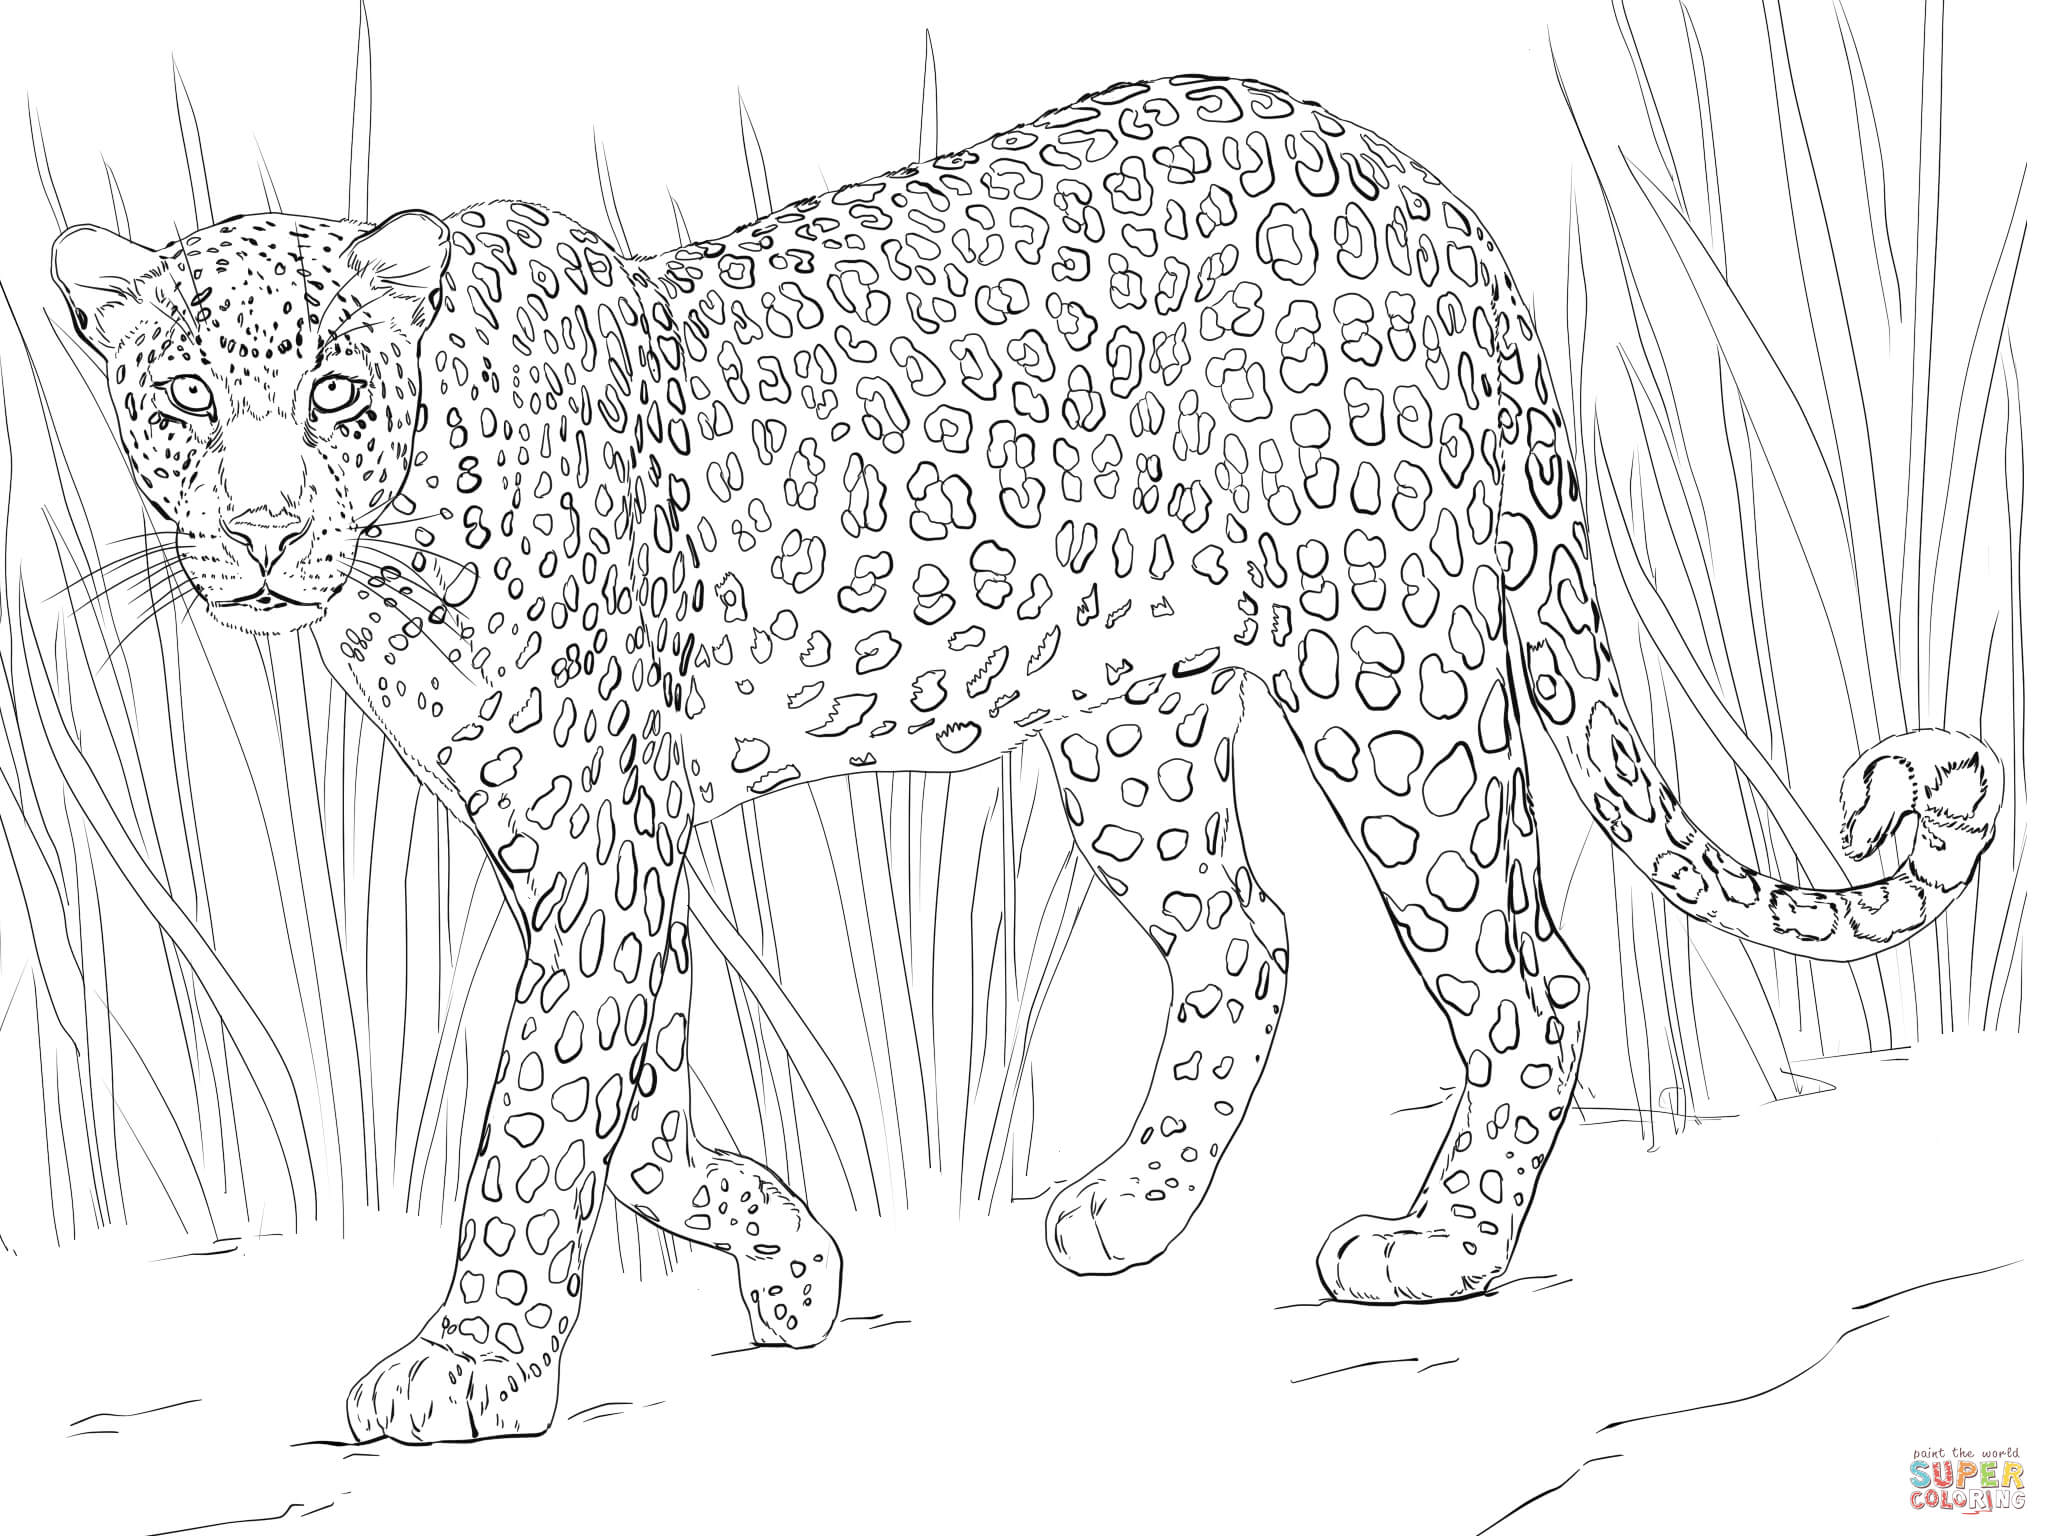 Free Leopard Coloring Pages, Download Free Leopard Coloring Pages png